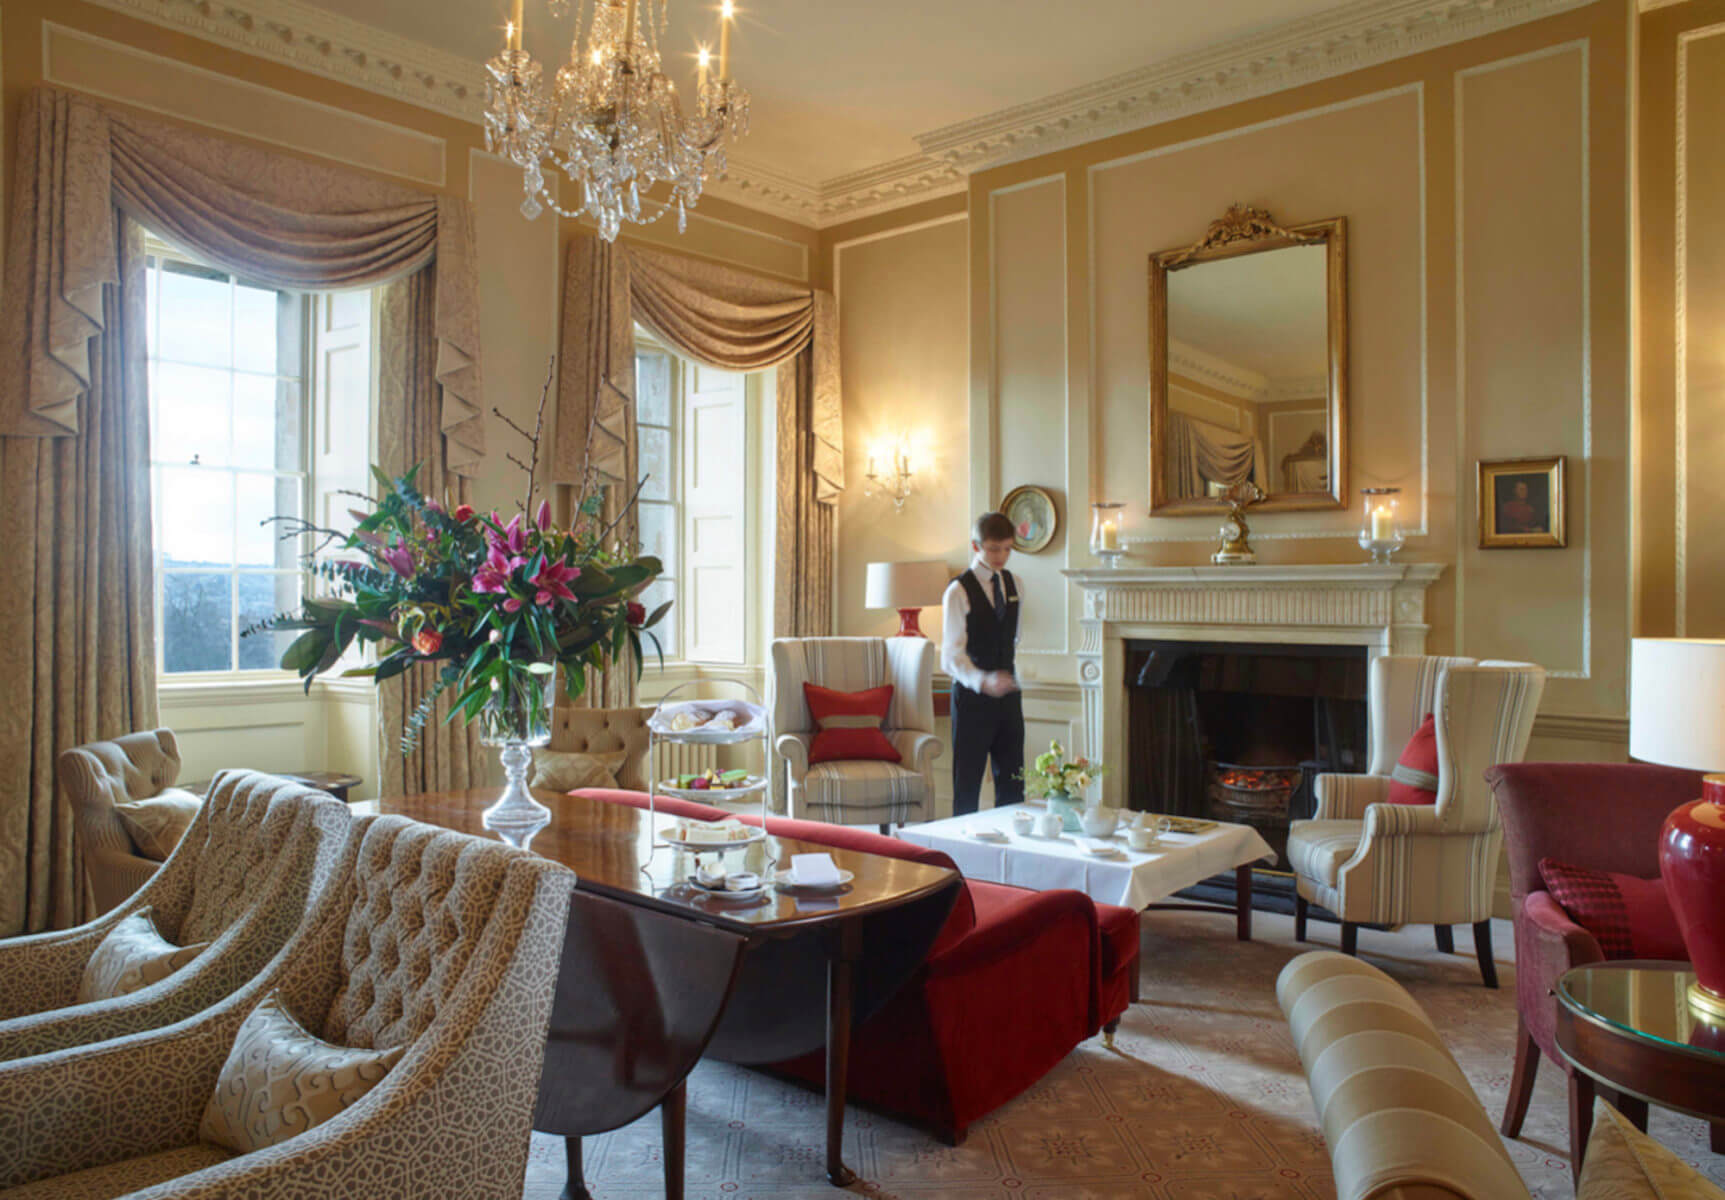 LUXURIA LIFESTYLE INTERNATIONAL'S RHONA BAKER REVIEWS THE ROYAL CRESCENT HOTEL & SPA IN BATH, UK